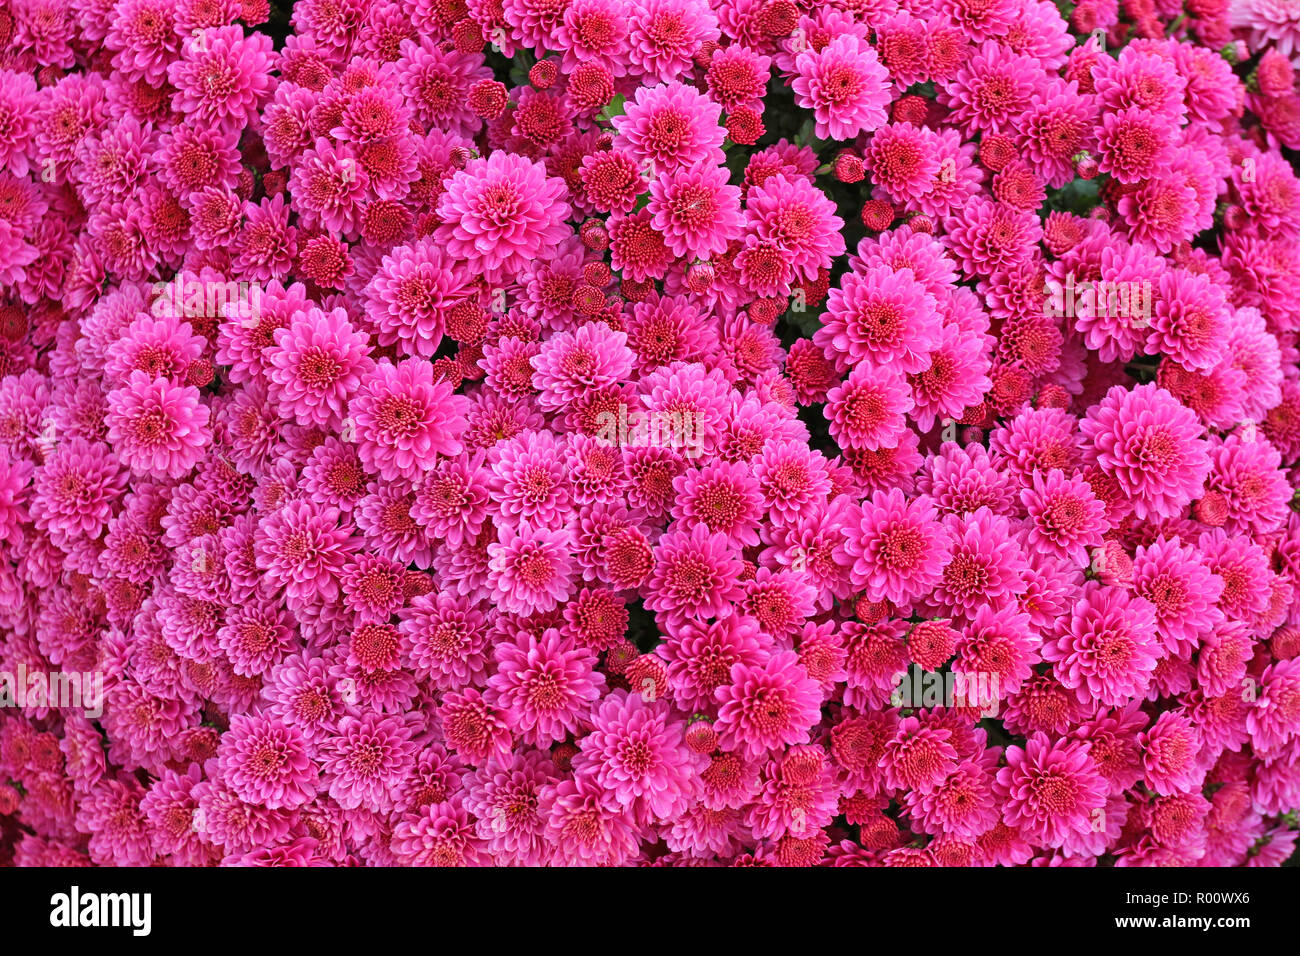 https://c8.alamy.com/comp/R00WX6/a-bouquet-of-beautiful-chrysanthemum-flowers-outdoors-chrysanthemums-in-the-garden-colorful-flower-chrisanthemum-floral-pattern-flowers-background-R00WX6.jpg